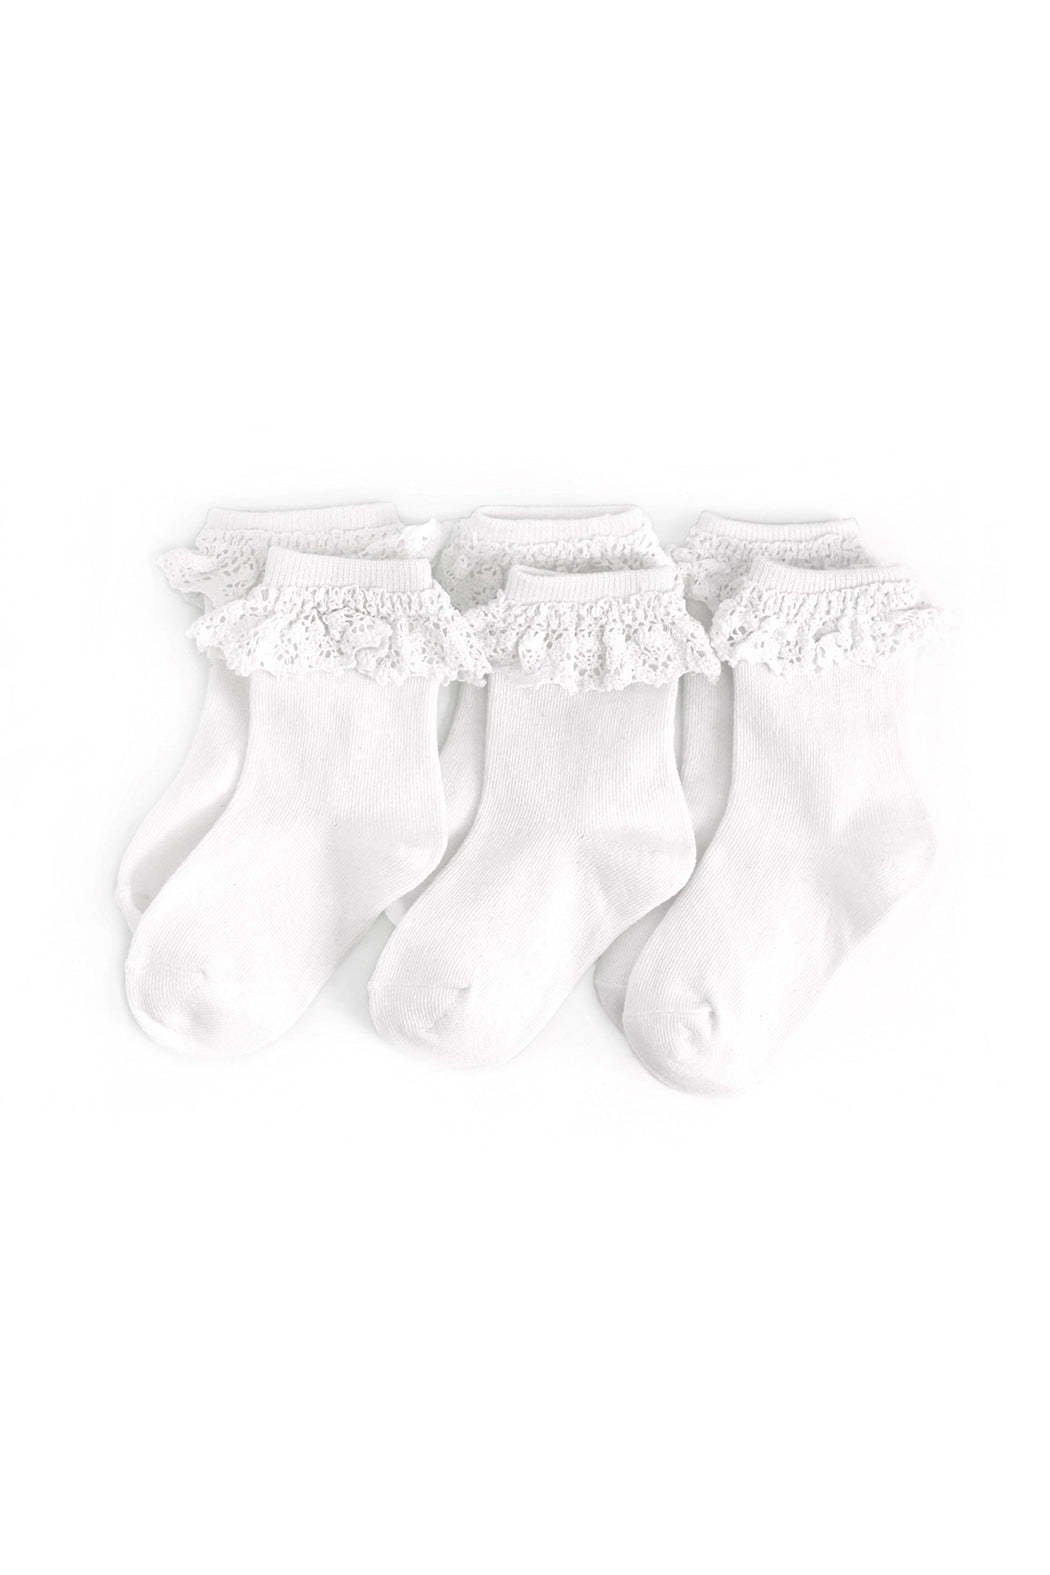 Little Stocking Co White Lace Midi Sock - 3 Pack